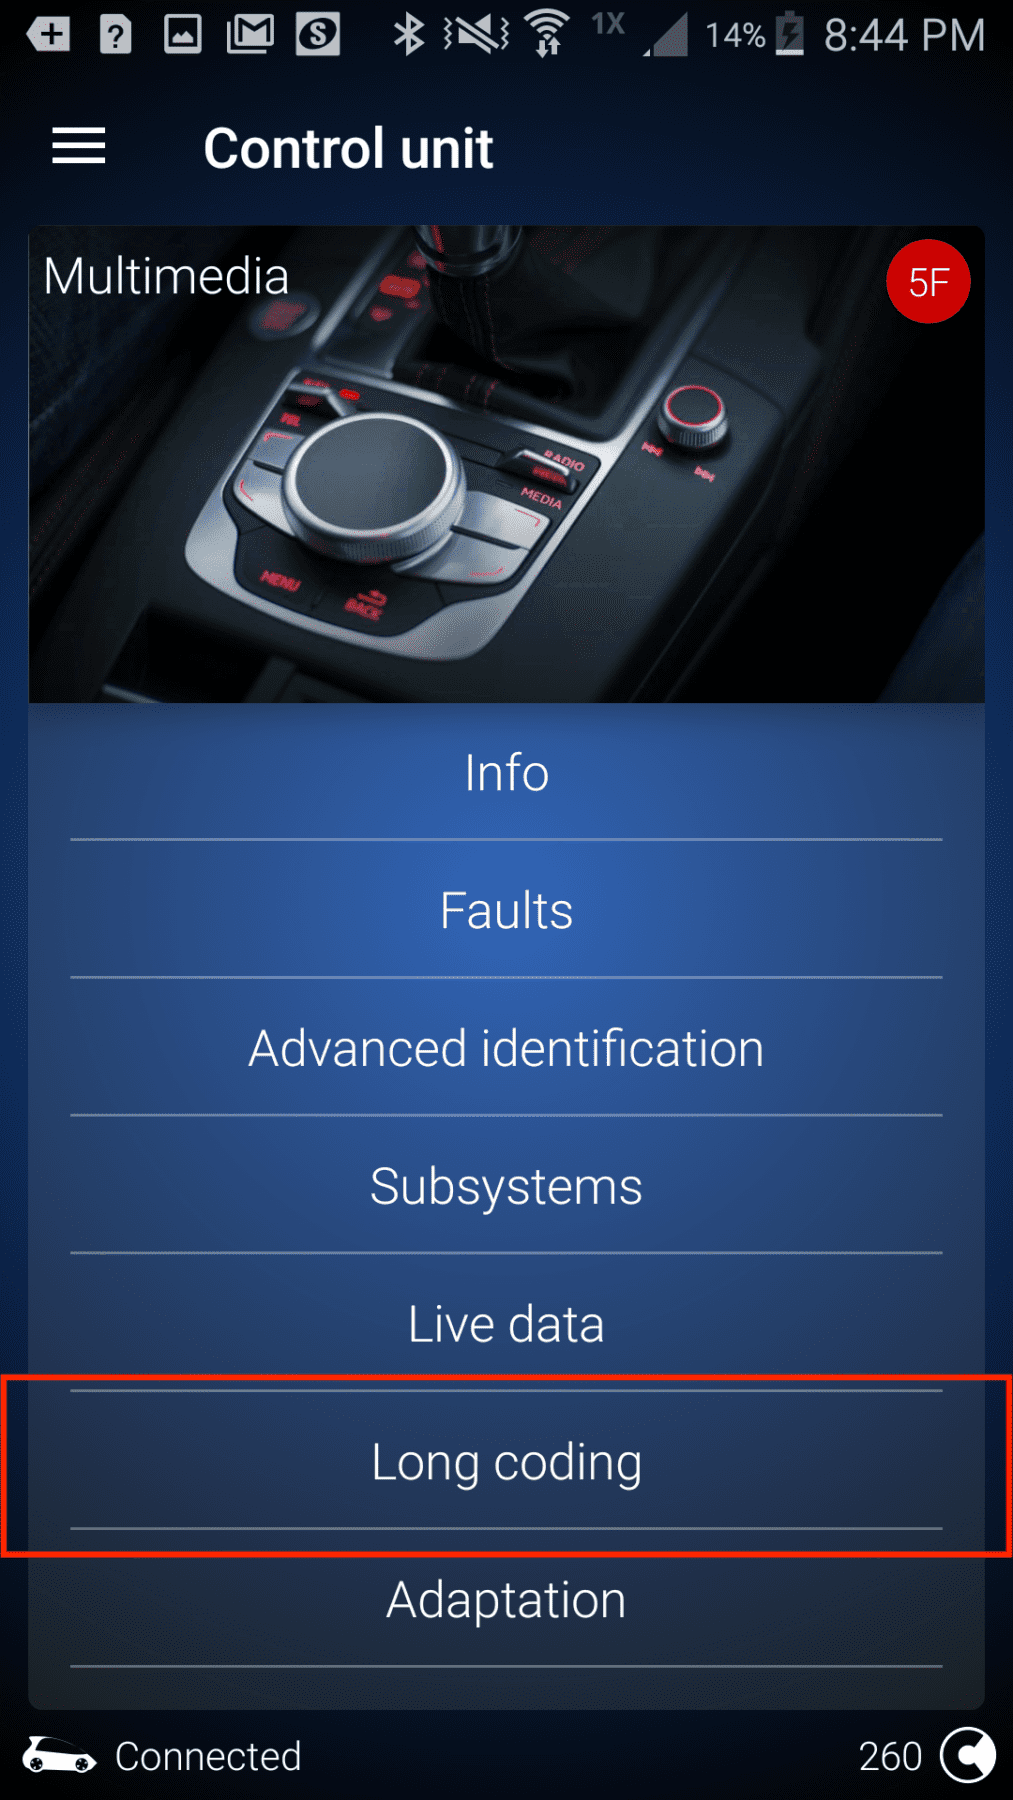 VW MK7.5 OBDEleven Multimedia Control Unit selected with options in app